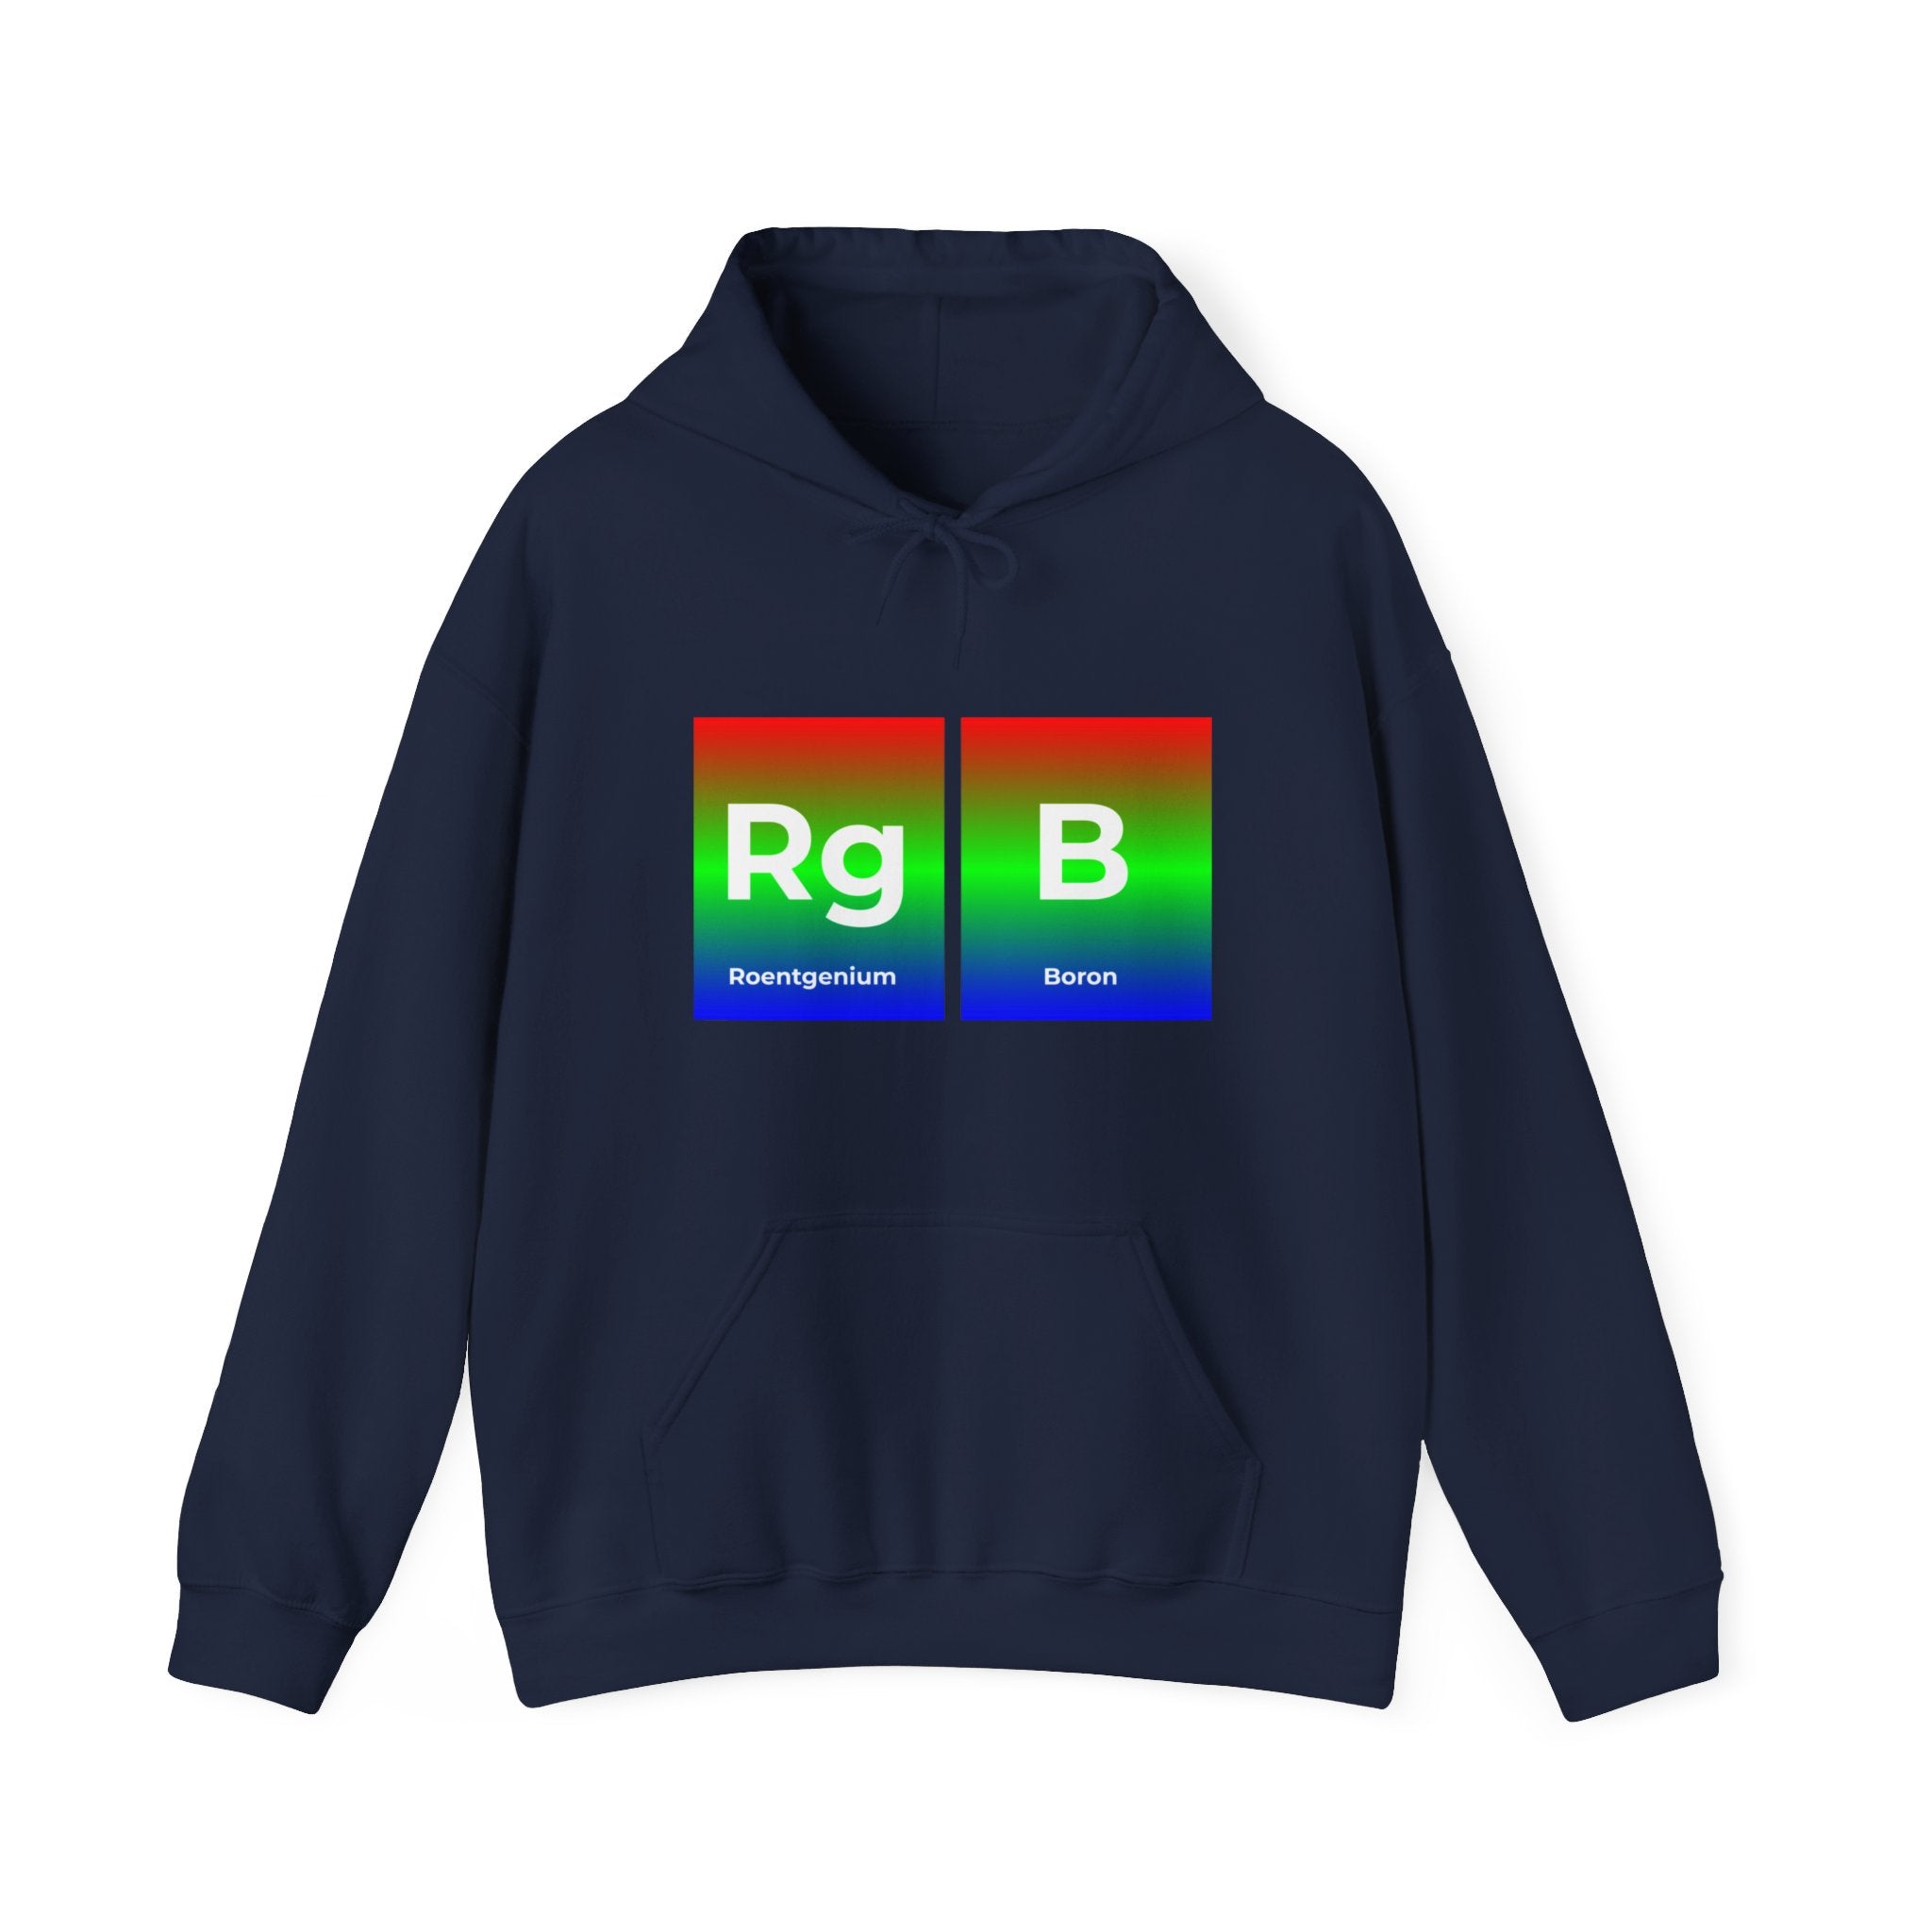 A RG-B - Hooded Sweatshirt featuring a graphic with the elements "Roentgenium" and "Boron" from the periodic table, labeled "Rg" and "B," on a gradient background transitioning from red to green to blue. Perfect for fans of RG-B designs seeking comfort in their style.